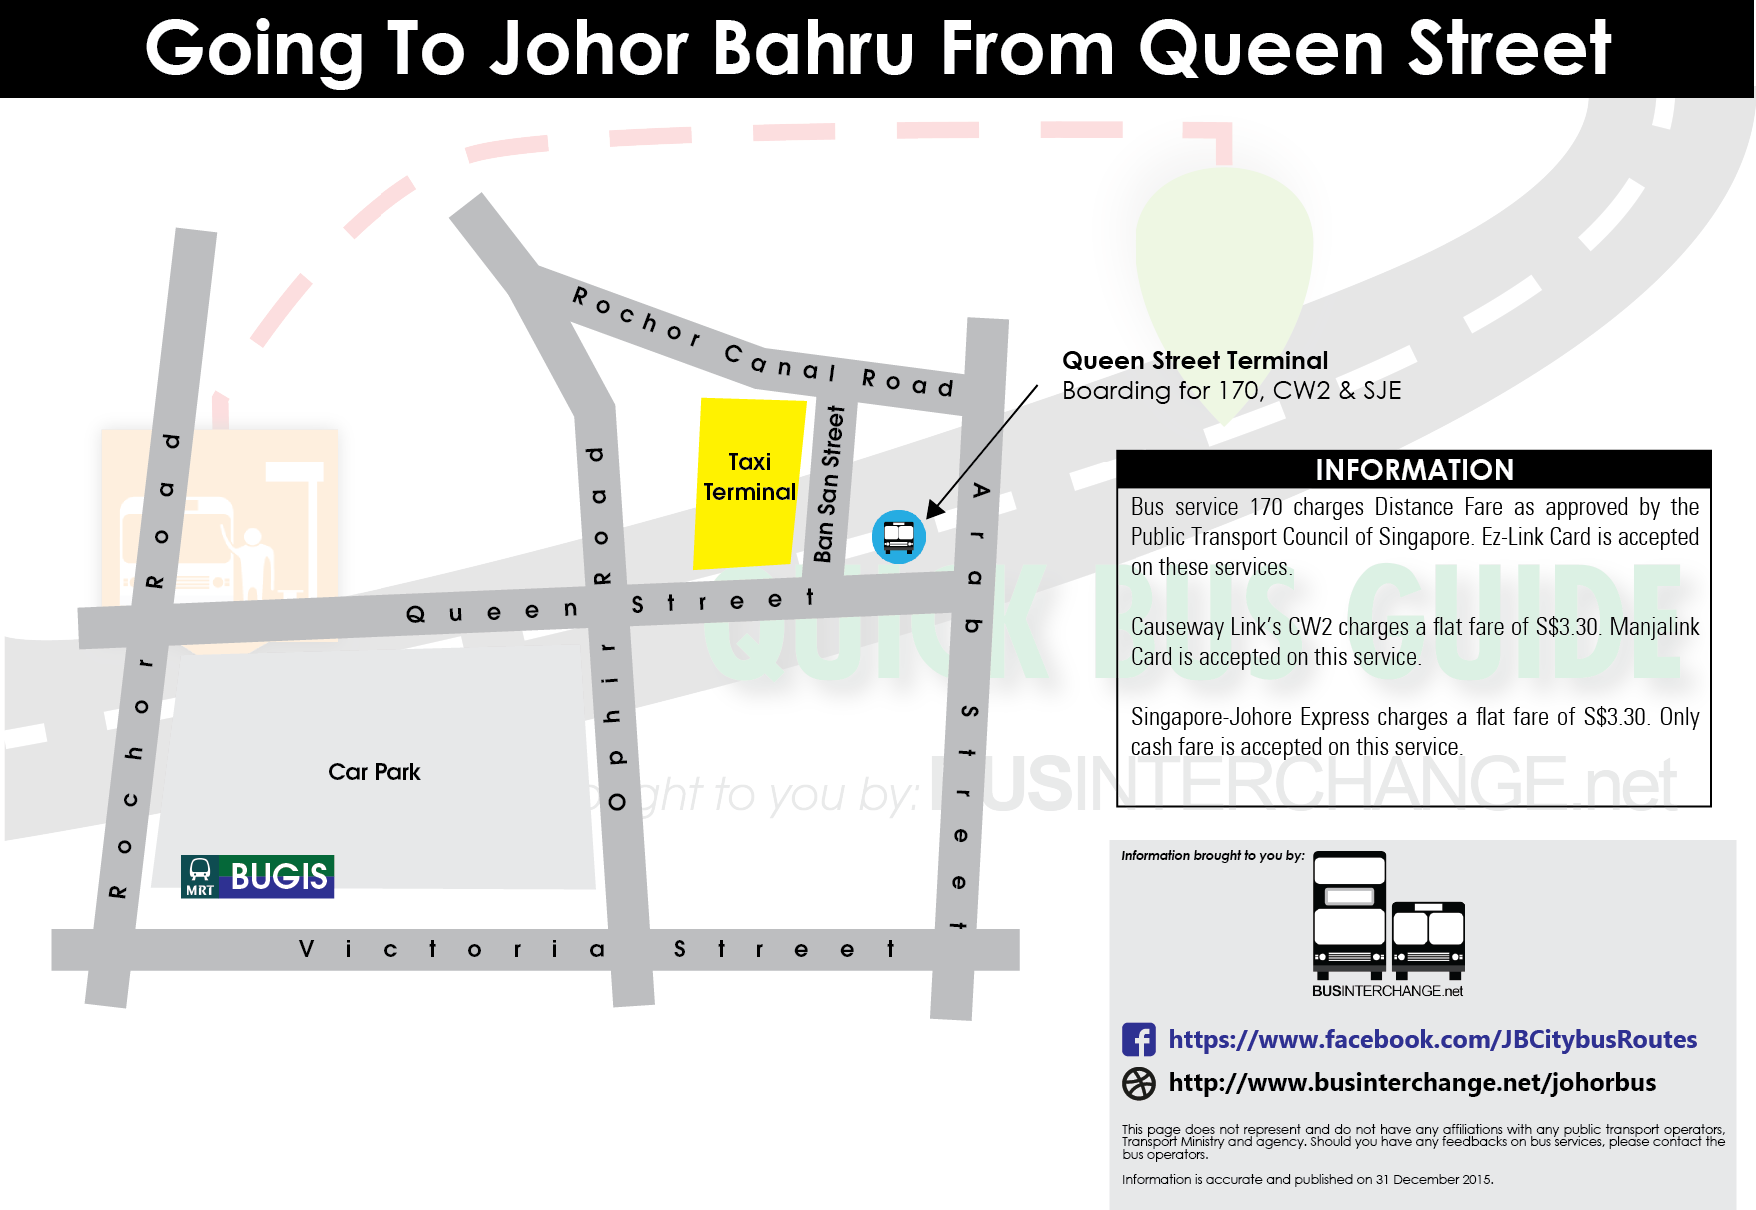 Boarding point for 170, CW2 and Singapore-Johore Express at Queen Street Terminal